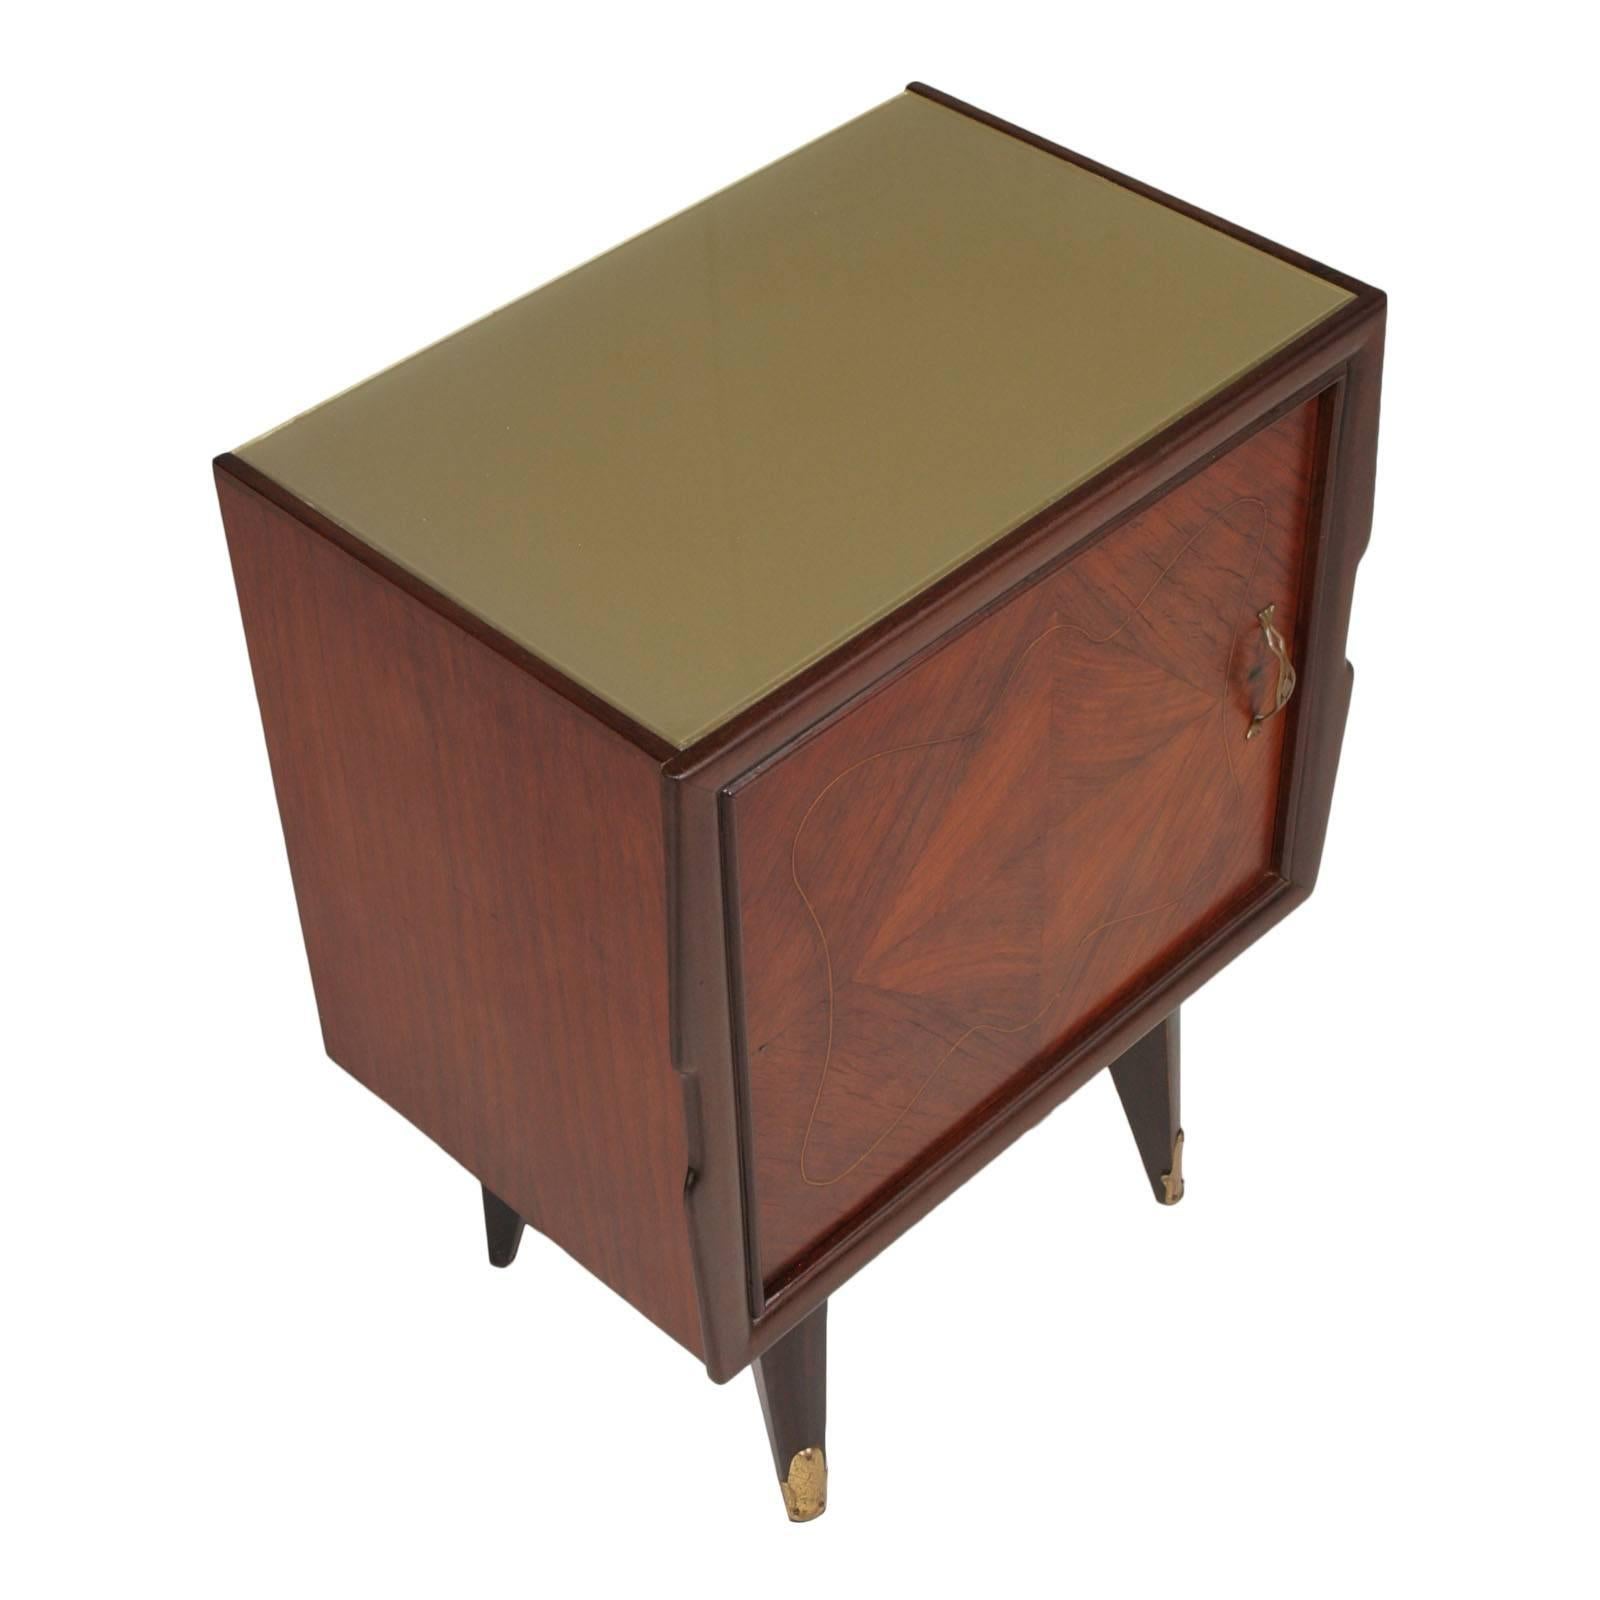 Pair of Mid-Century modern Paolo Buffa style nightstands in walnut, with mahogany interior, inlay thread the door, top in laquered glass. Golden brass feet.

Measure in cm: H 62, W 48, D 32.